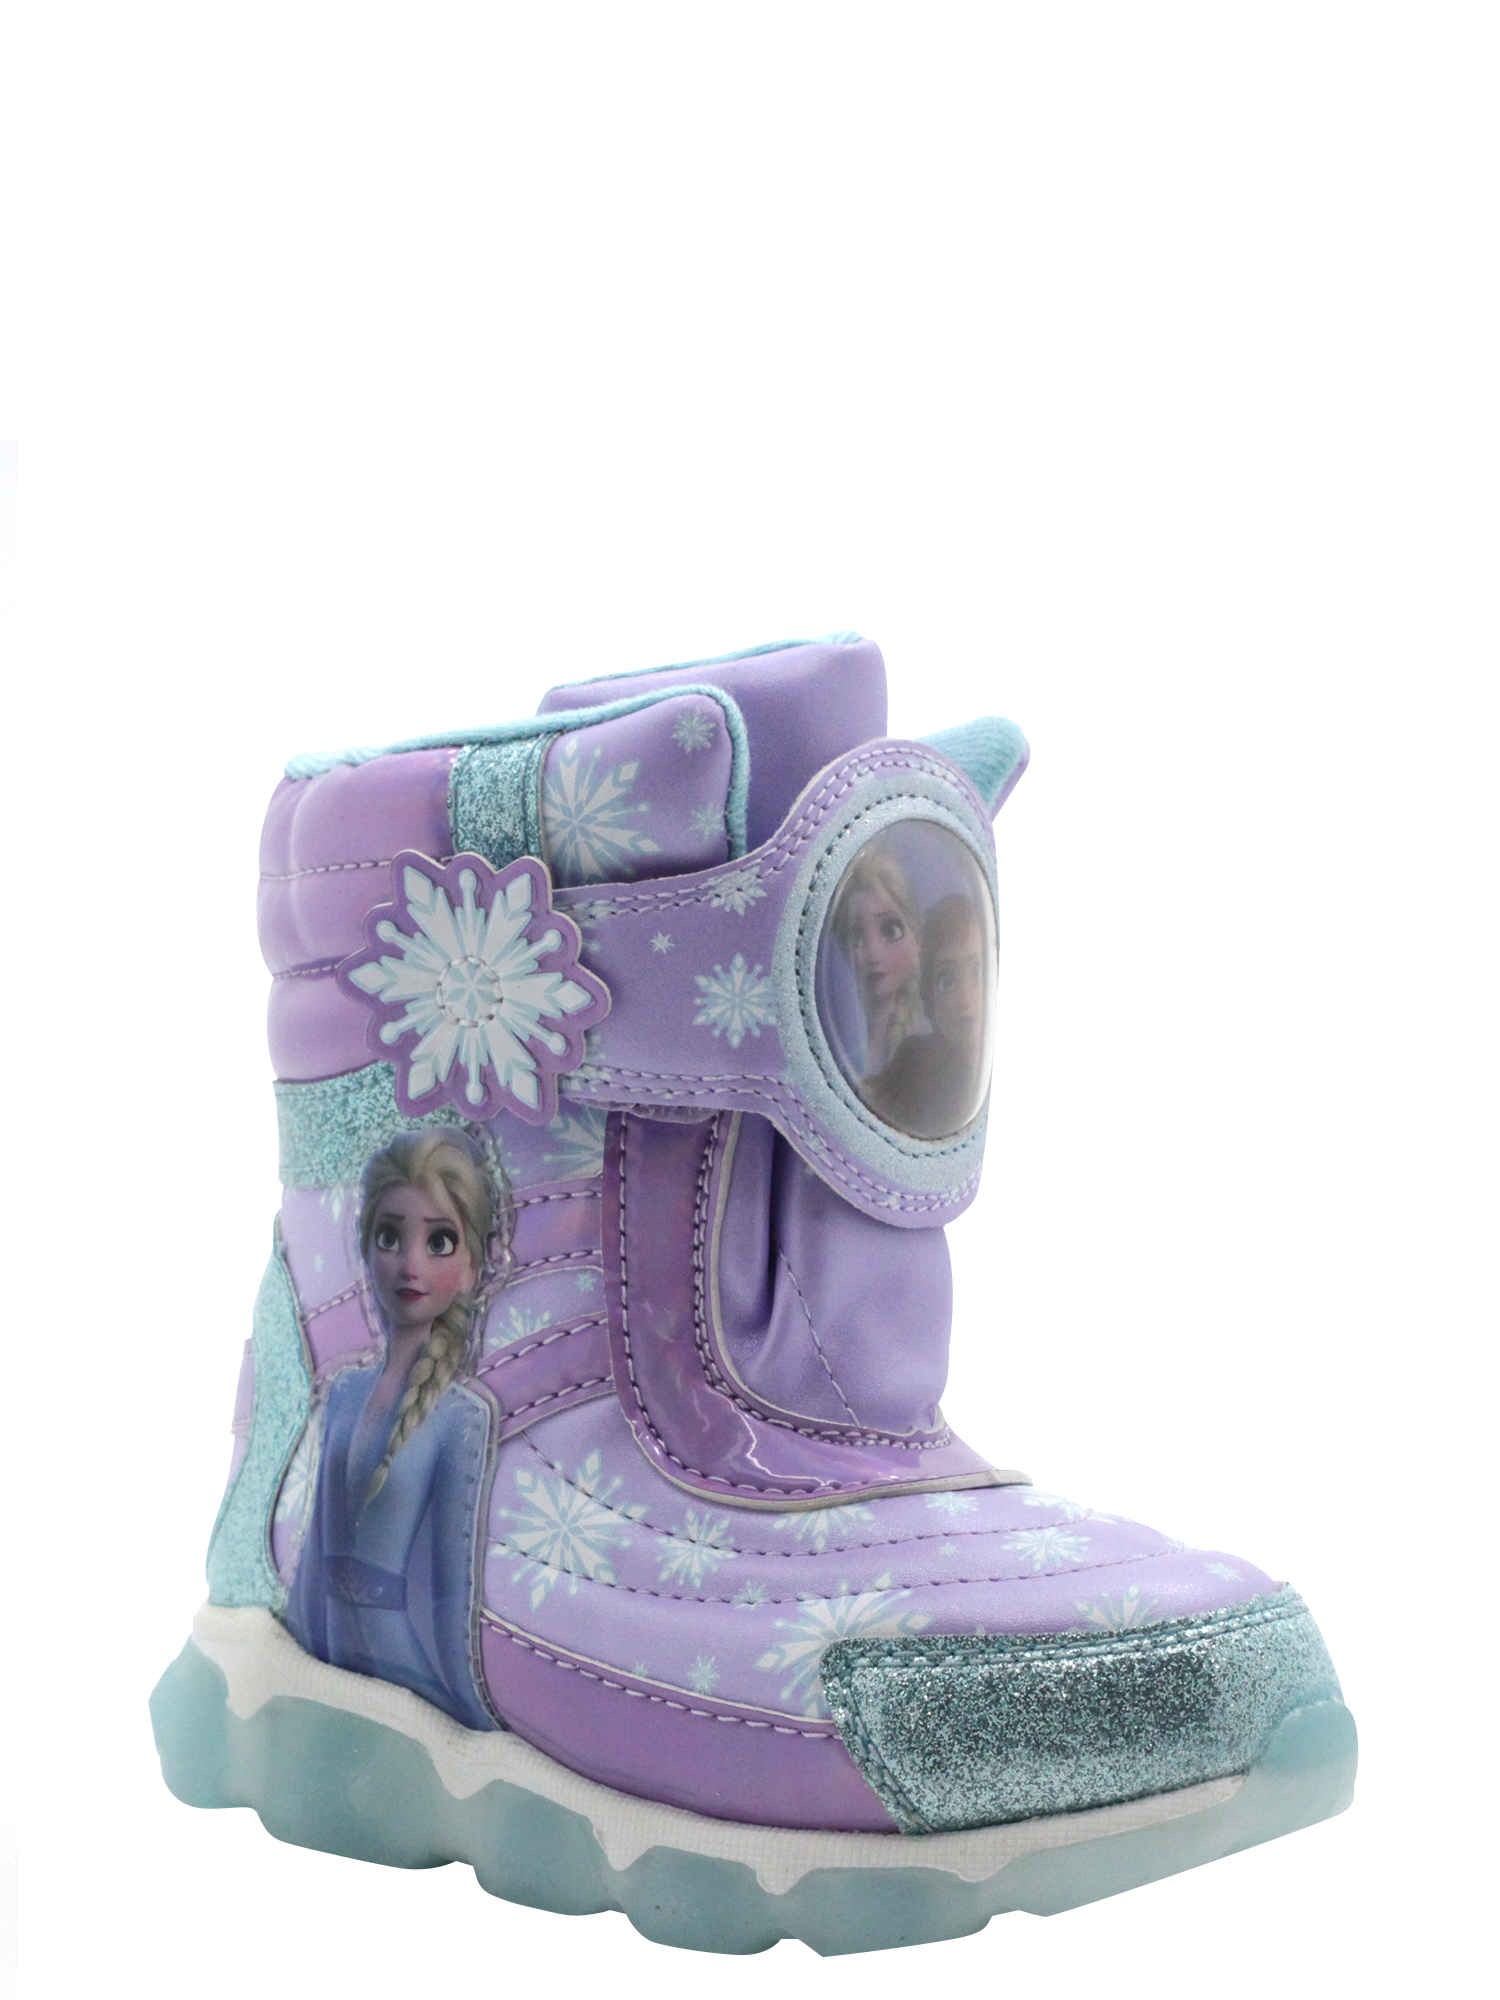 Disney Frozen 2 Bubble Snow Boot (Toddler Girls) - image 4 of 6